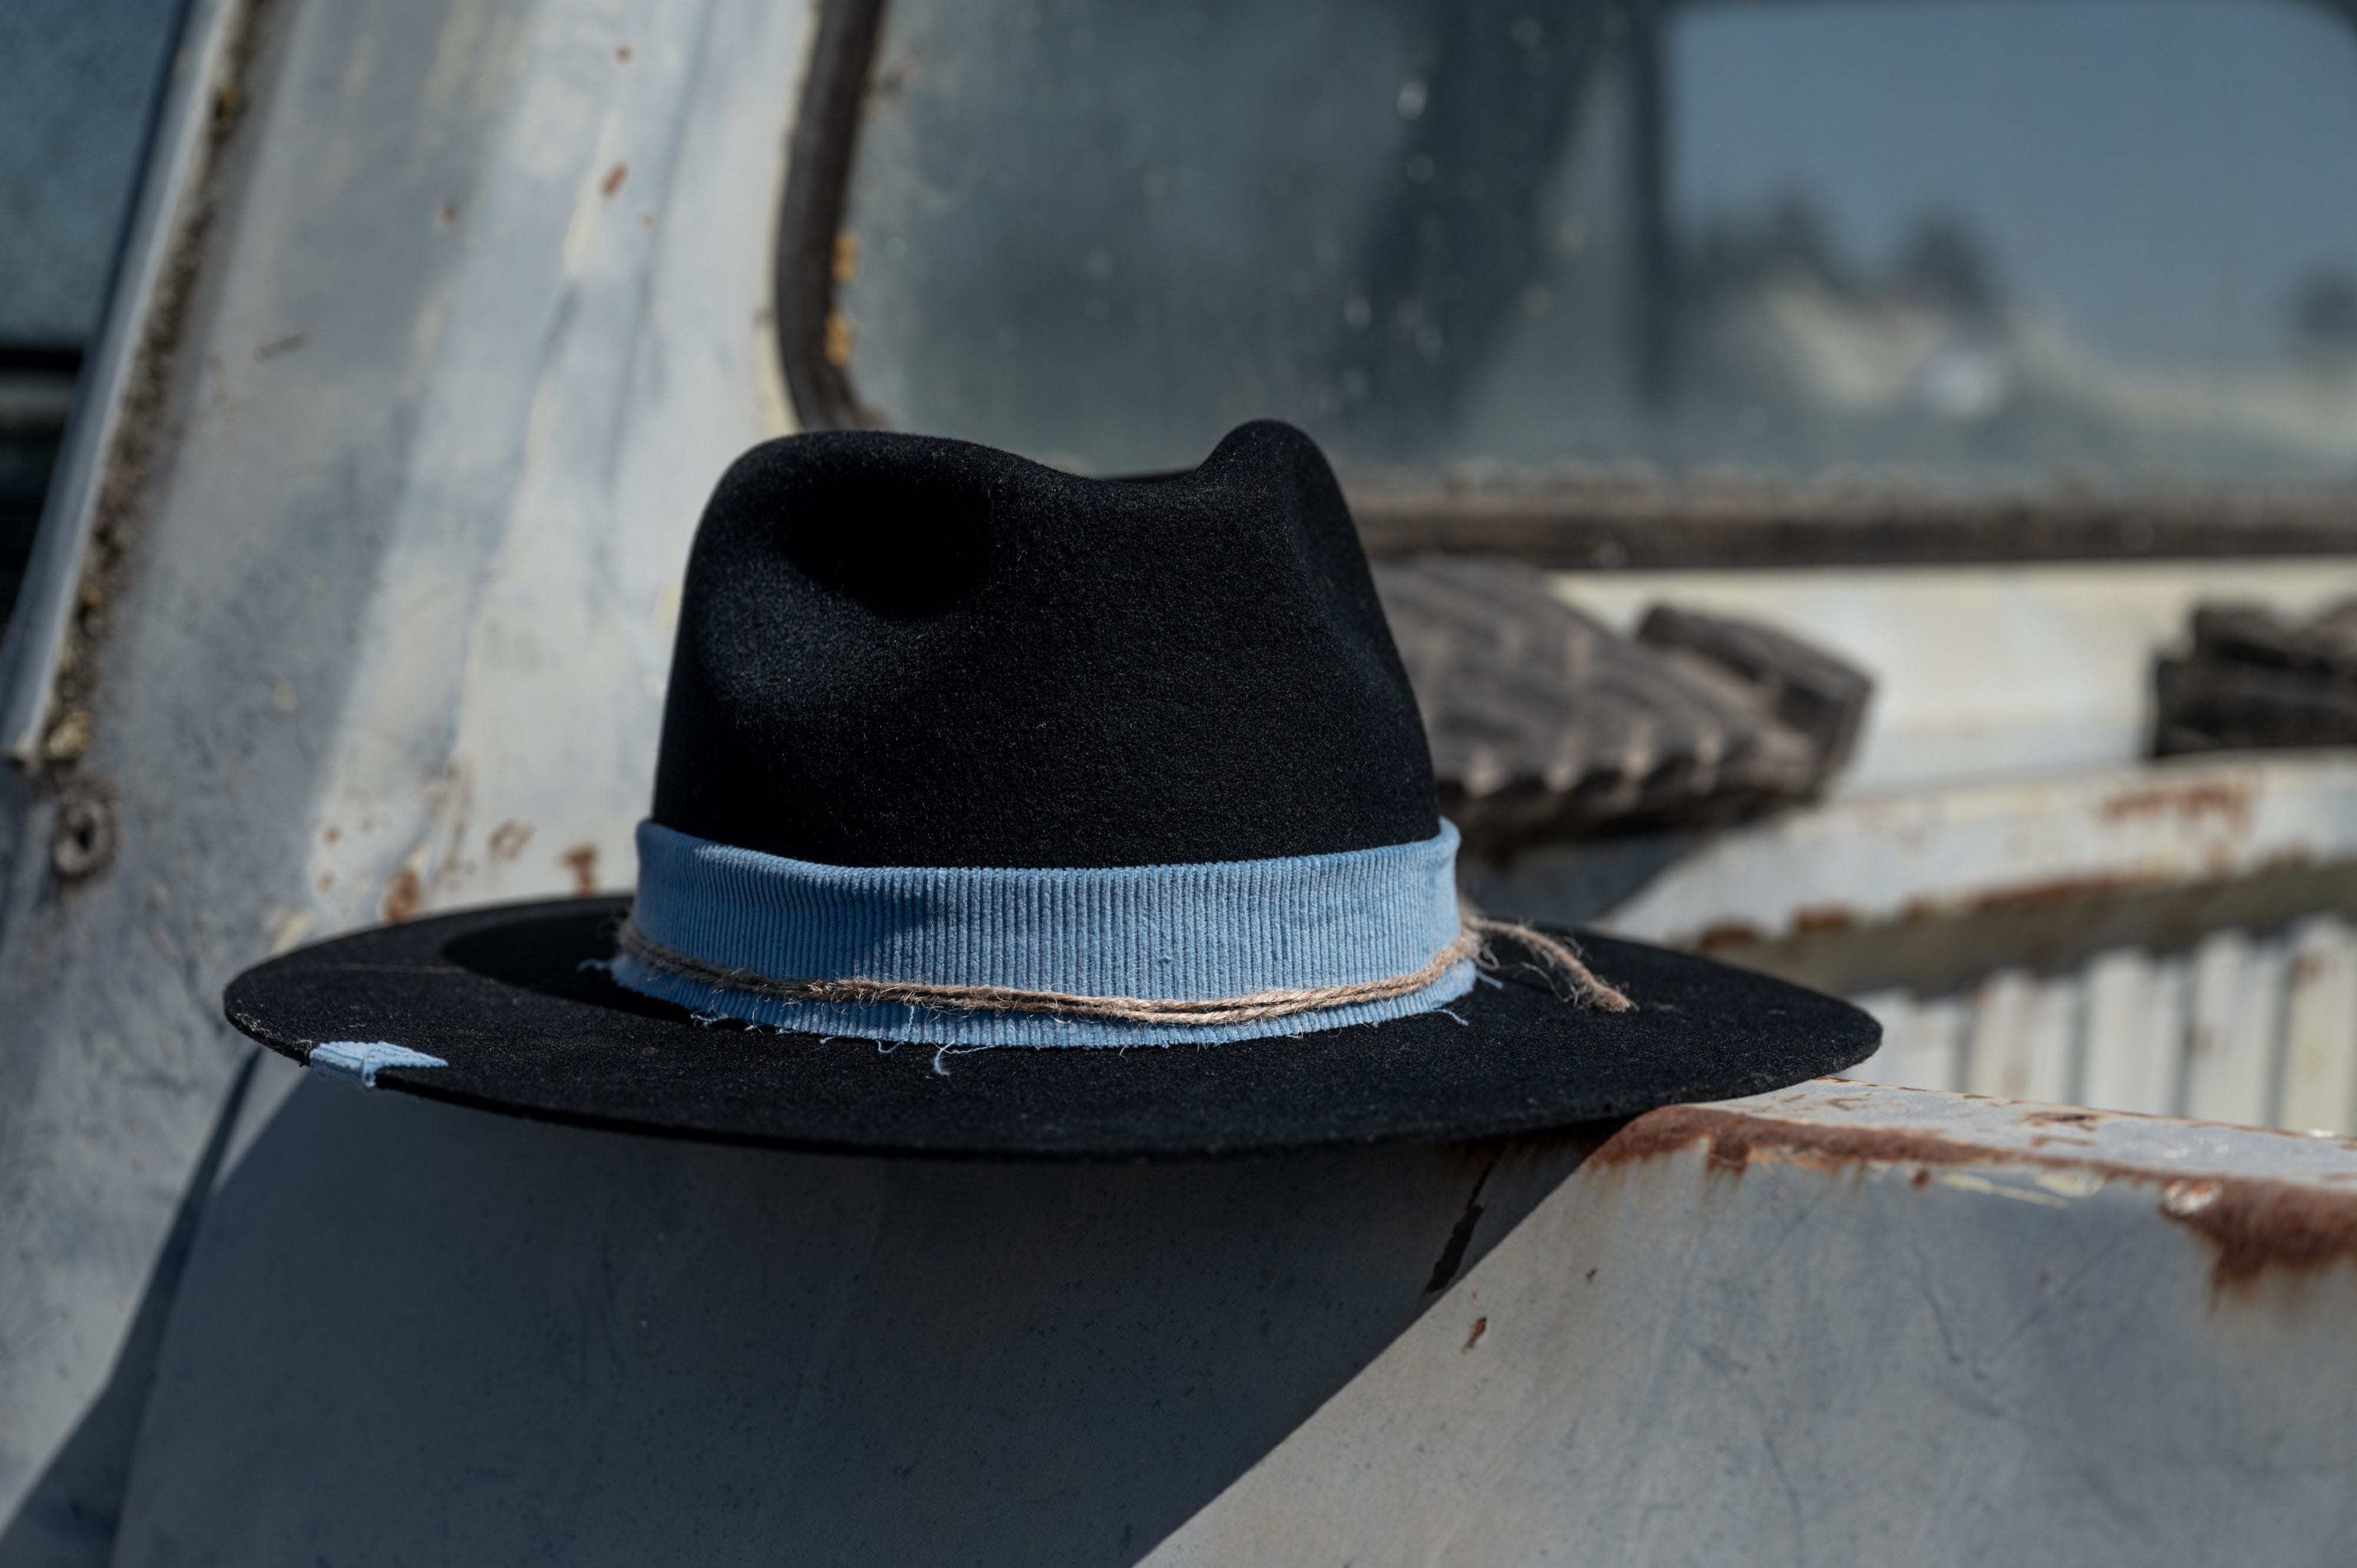 A black cowboy hat placed at the side of a truck